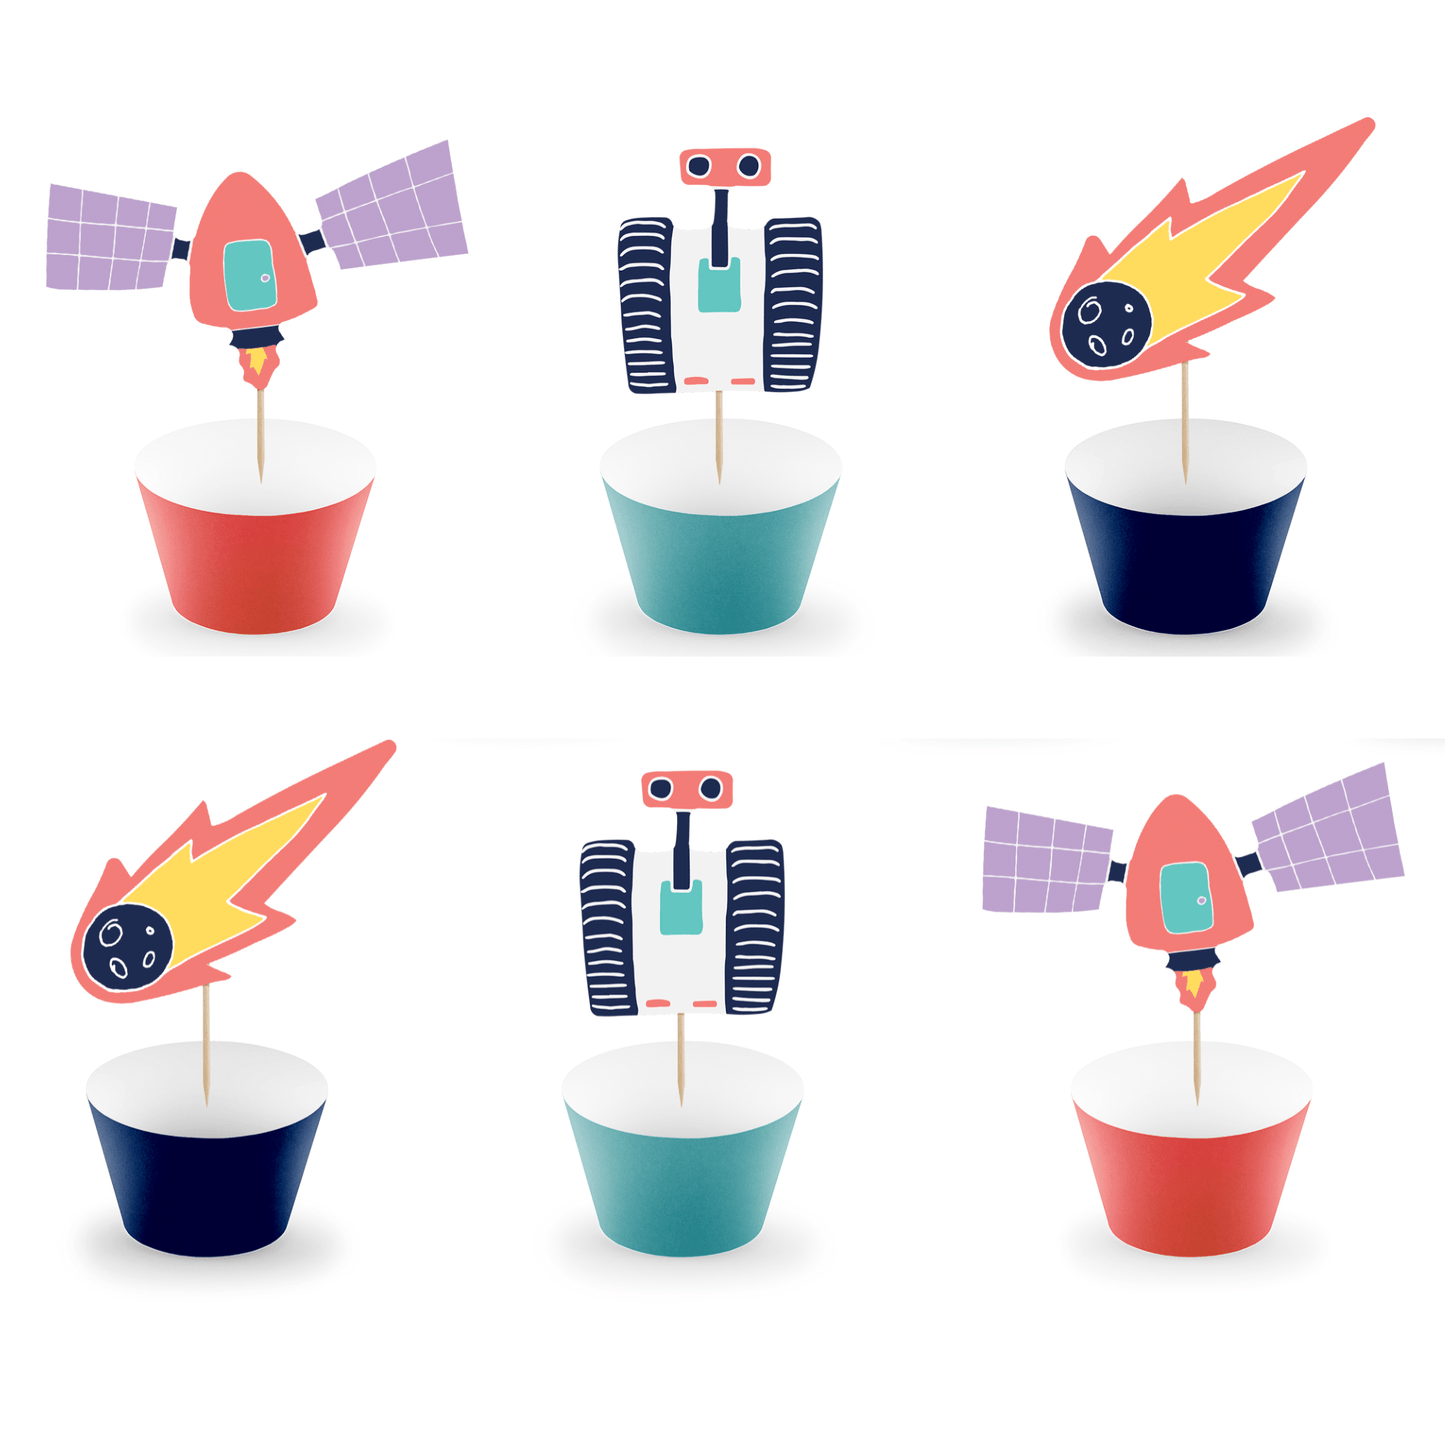 Space Party Cake Decorations | Cupcake Kit | Space Party Decorations Party Deco